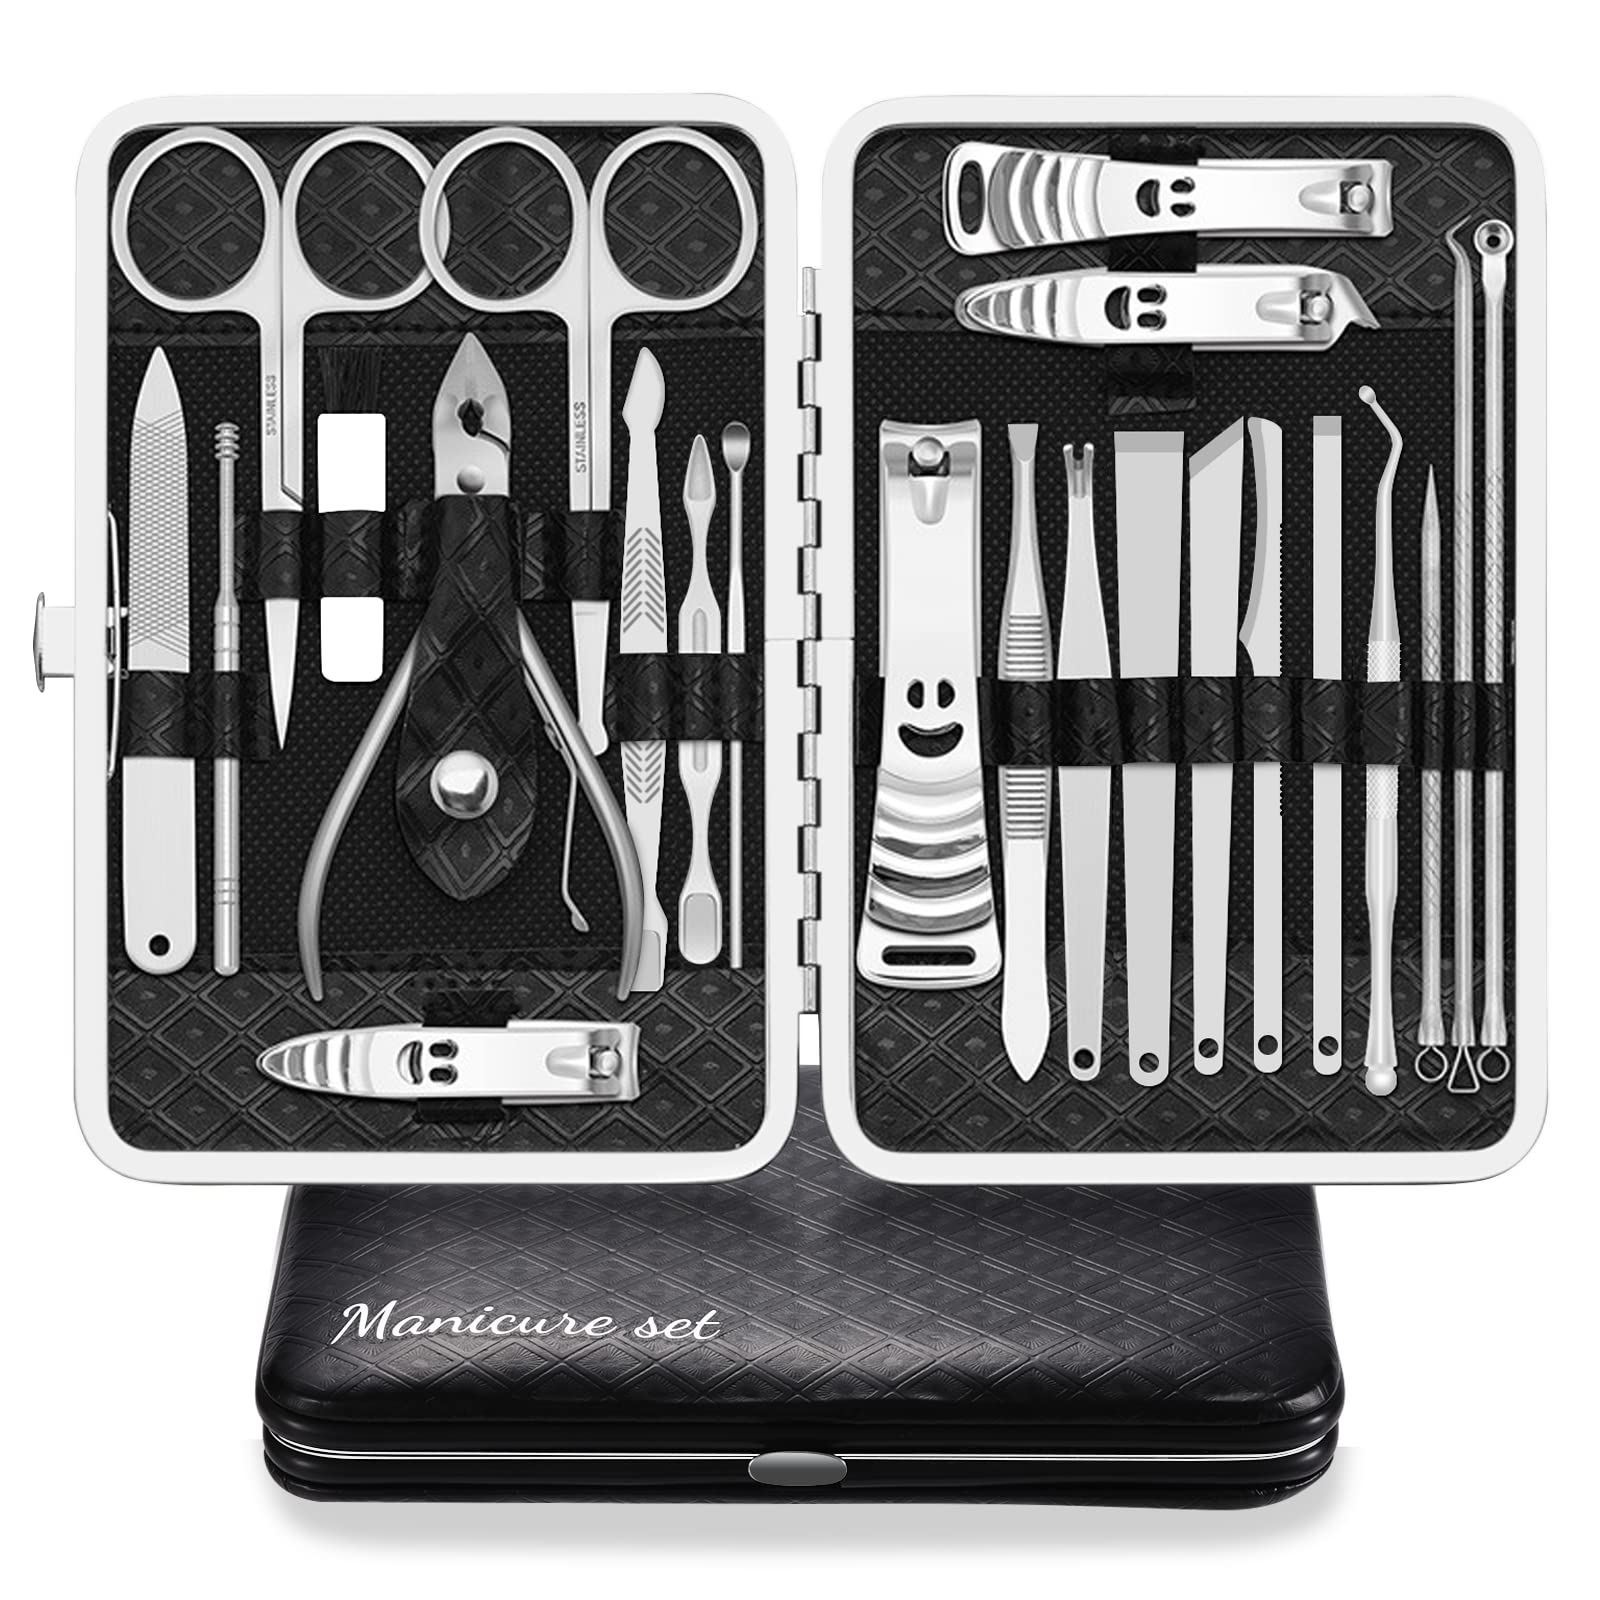 Manicure Set Professional Nail Clippers Kit Pedicure Care Tools 23pcs Stainless Steel Grooming Tools With Black PU Leather Case for Travel or Home (Black/Silver)